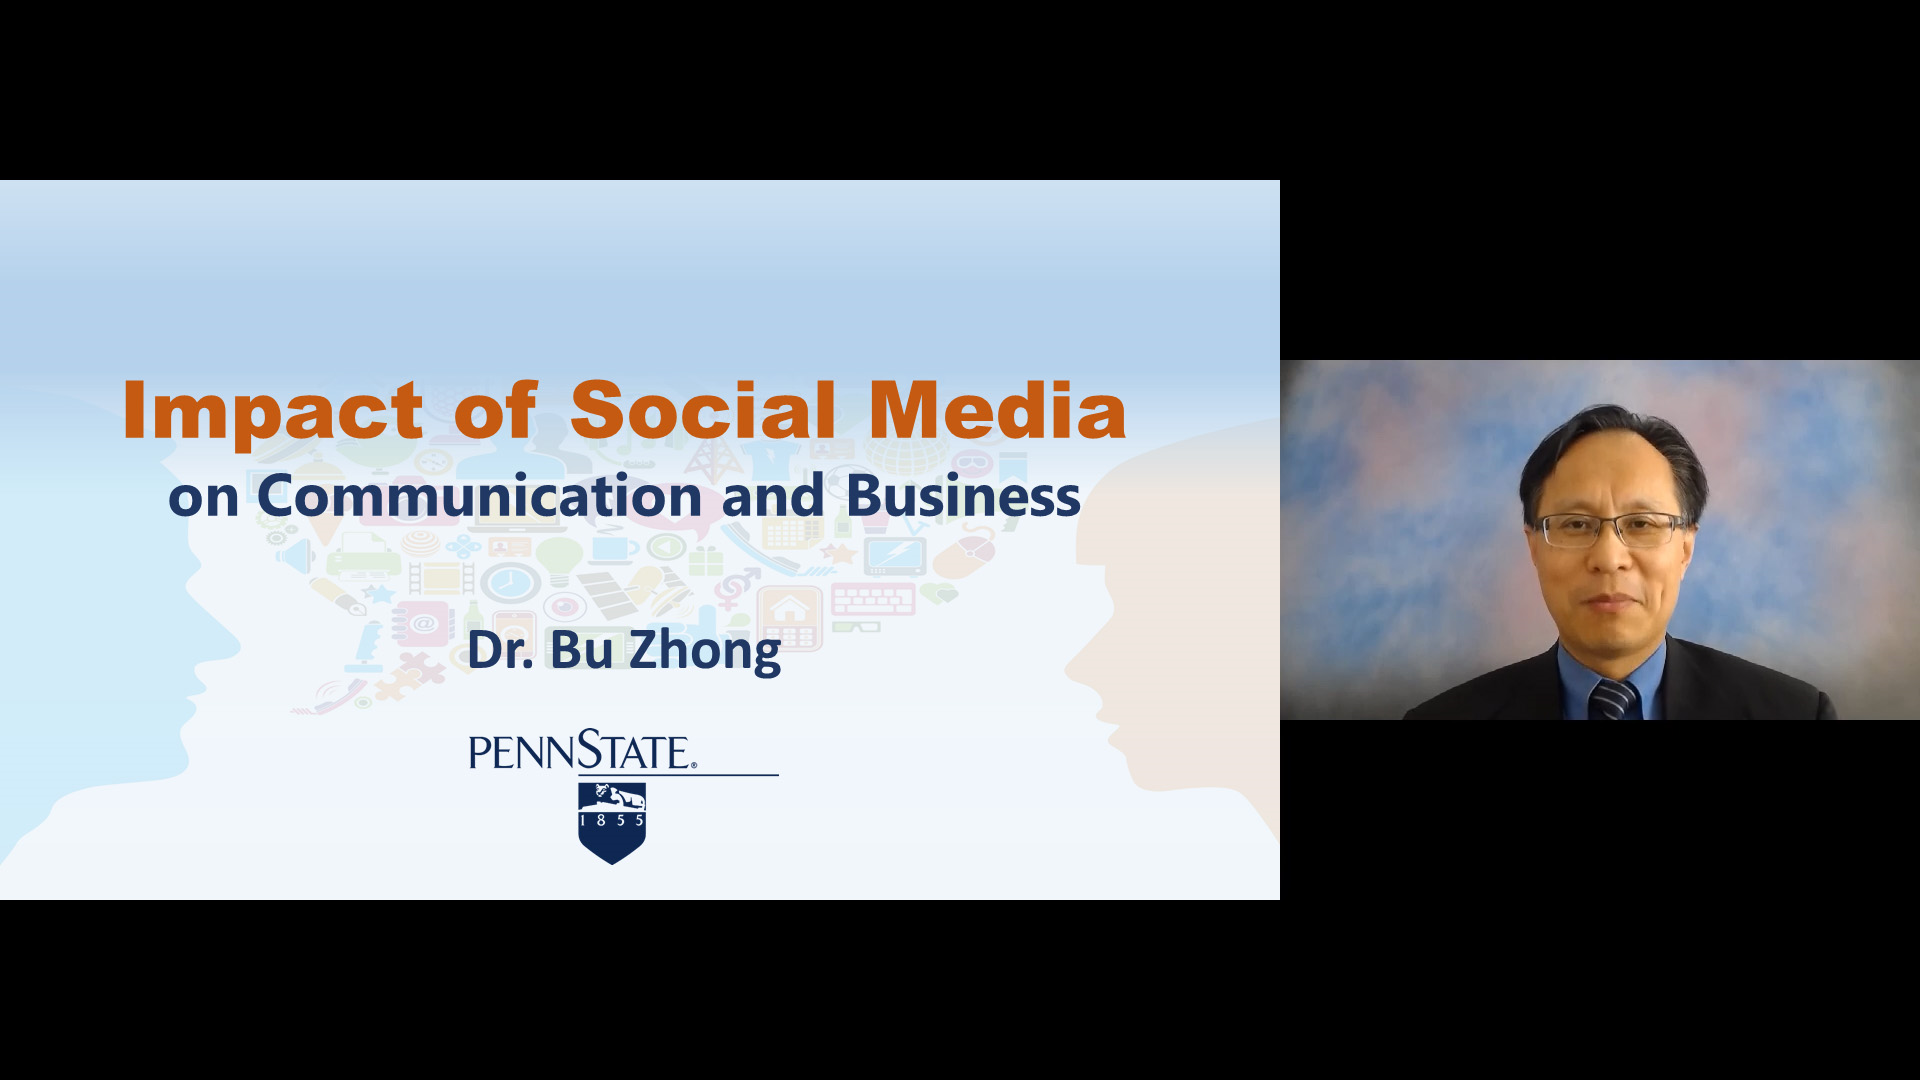 Impact of Social Media on Communication and Business